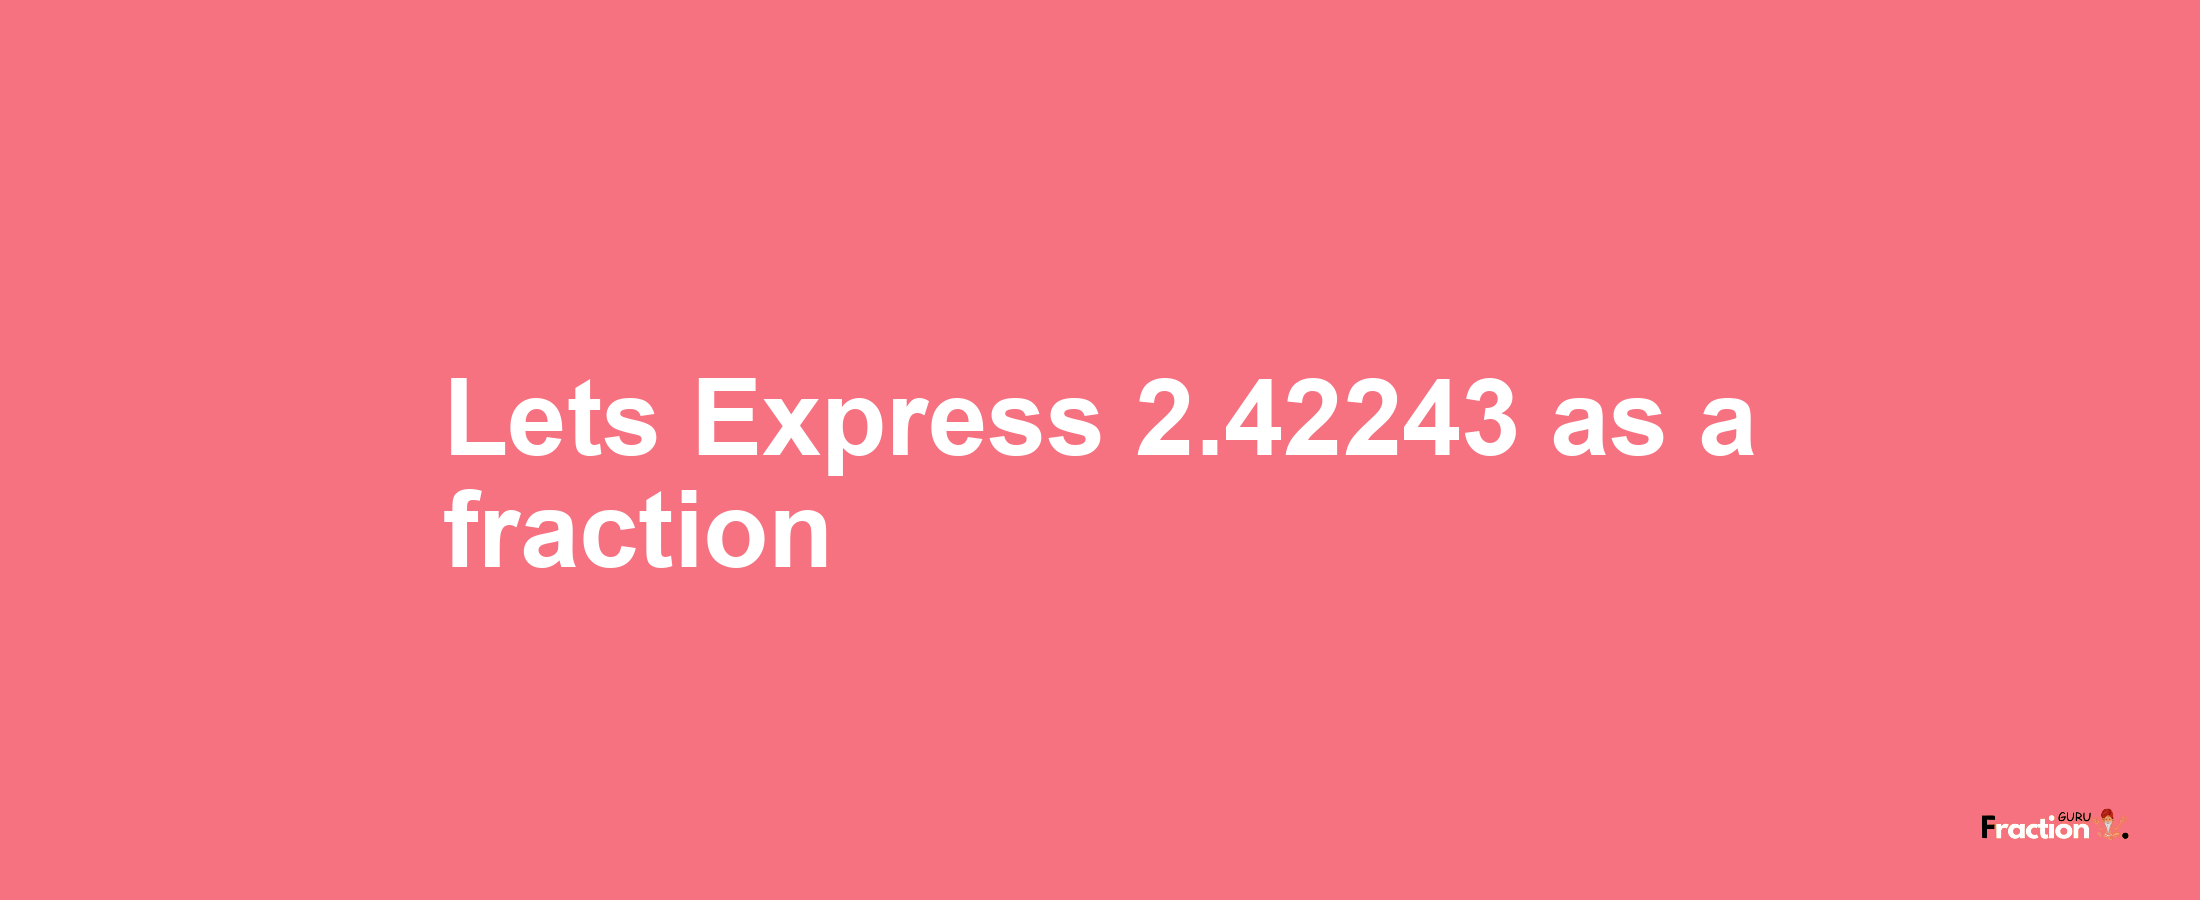 Lets Express 2.42243 as afraction